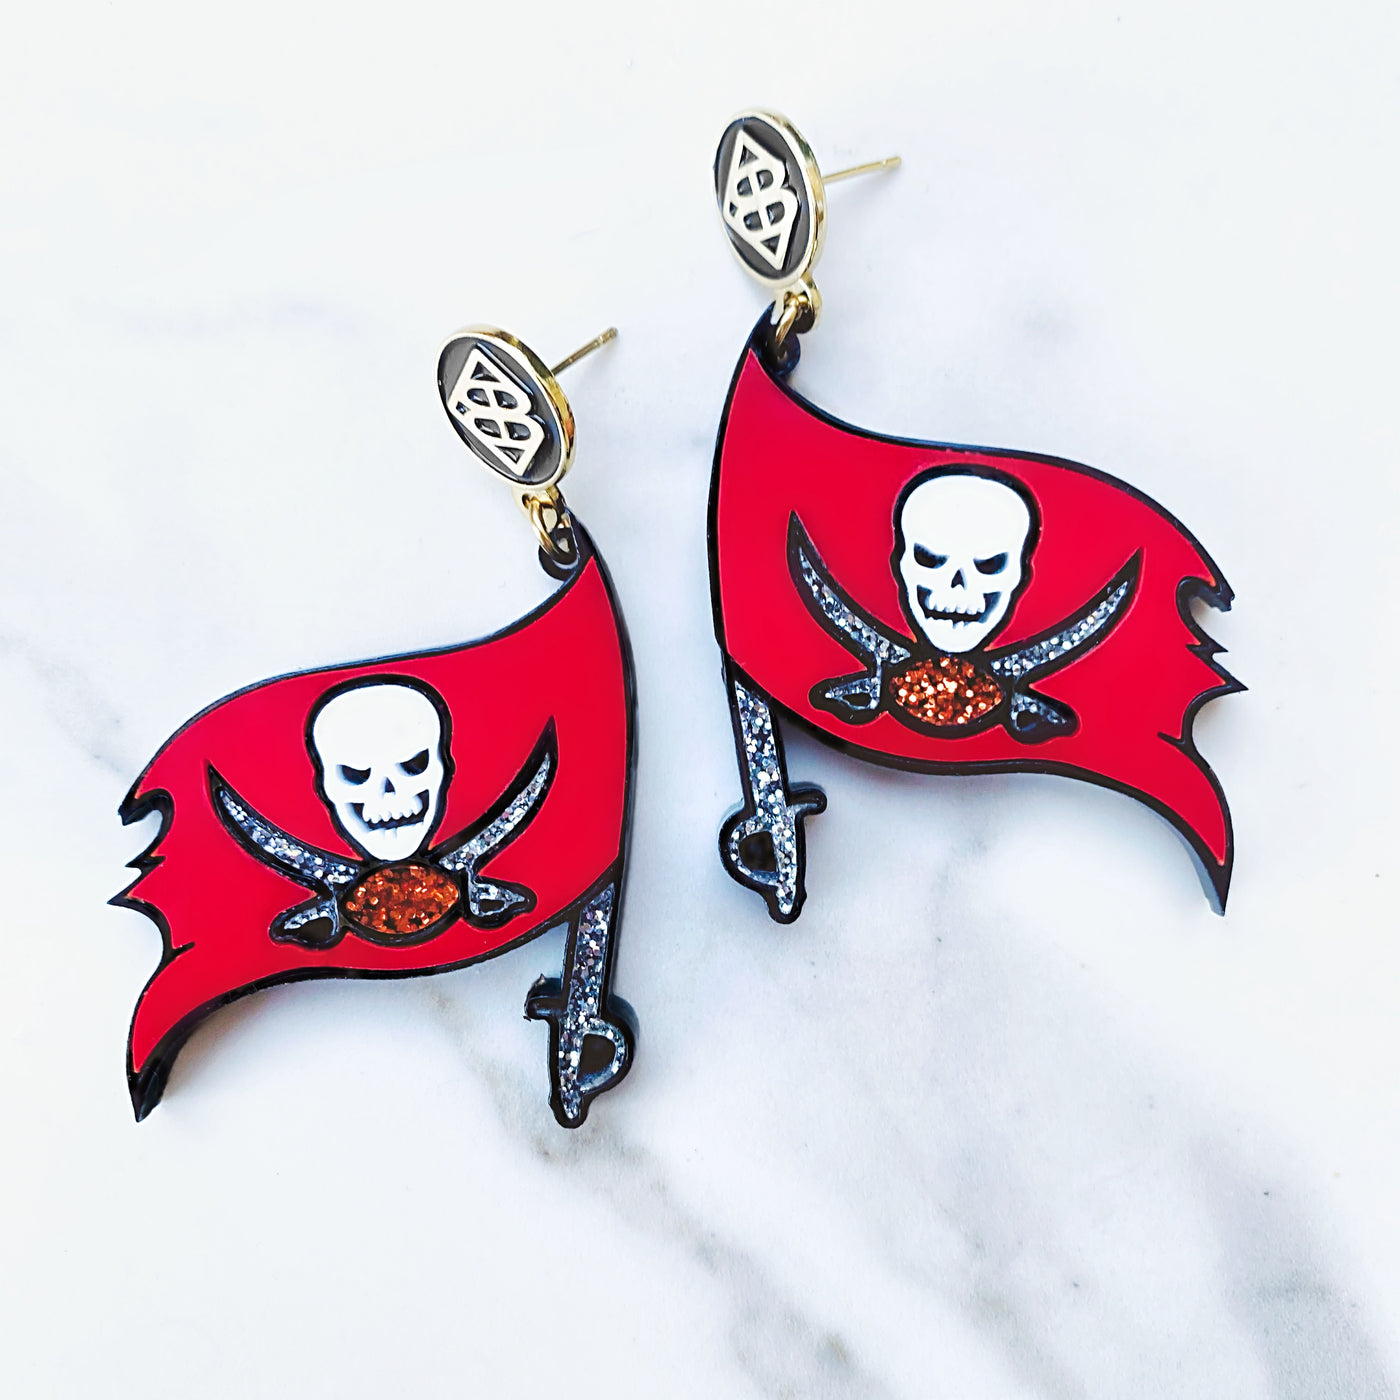 Tampa Bay Bucs Flag Earrings with Black BC Logo Top